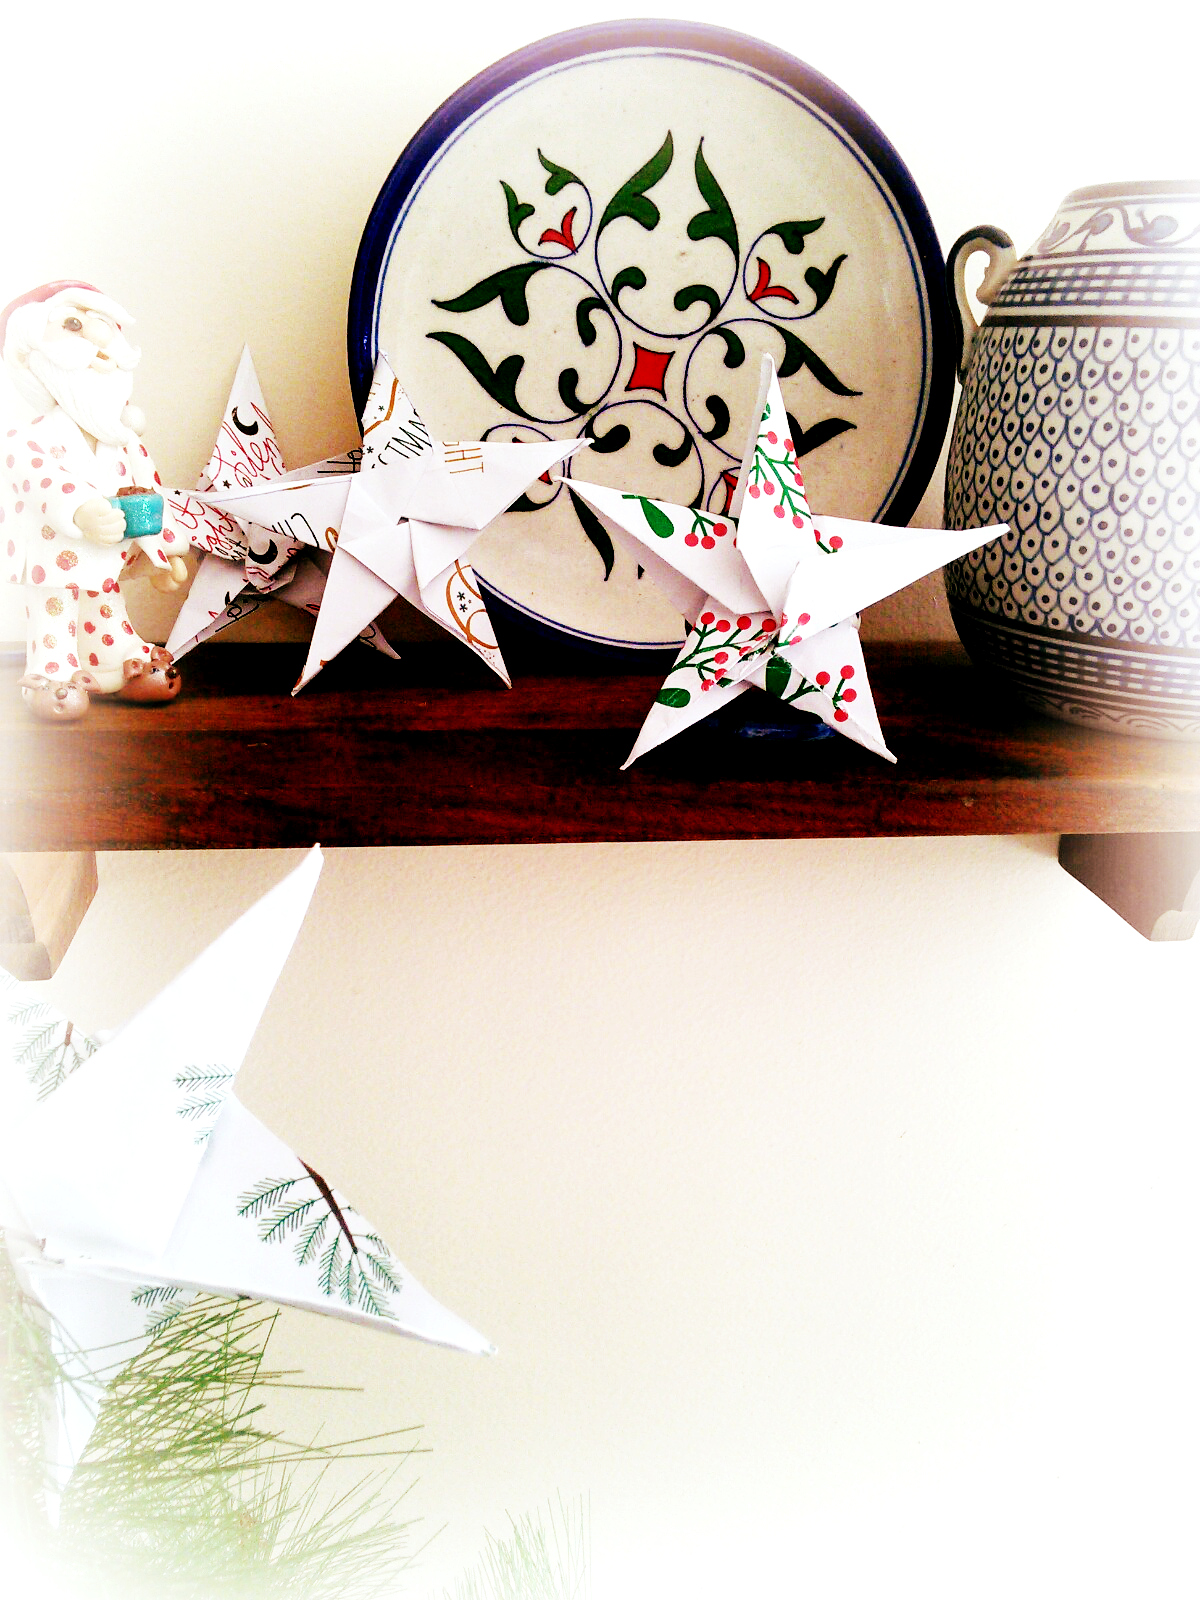 Origami Christmas stars made by paper | Sustainable Christmas decor ideas